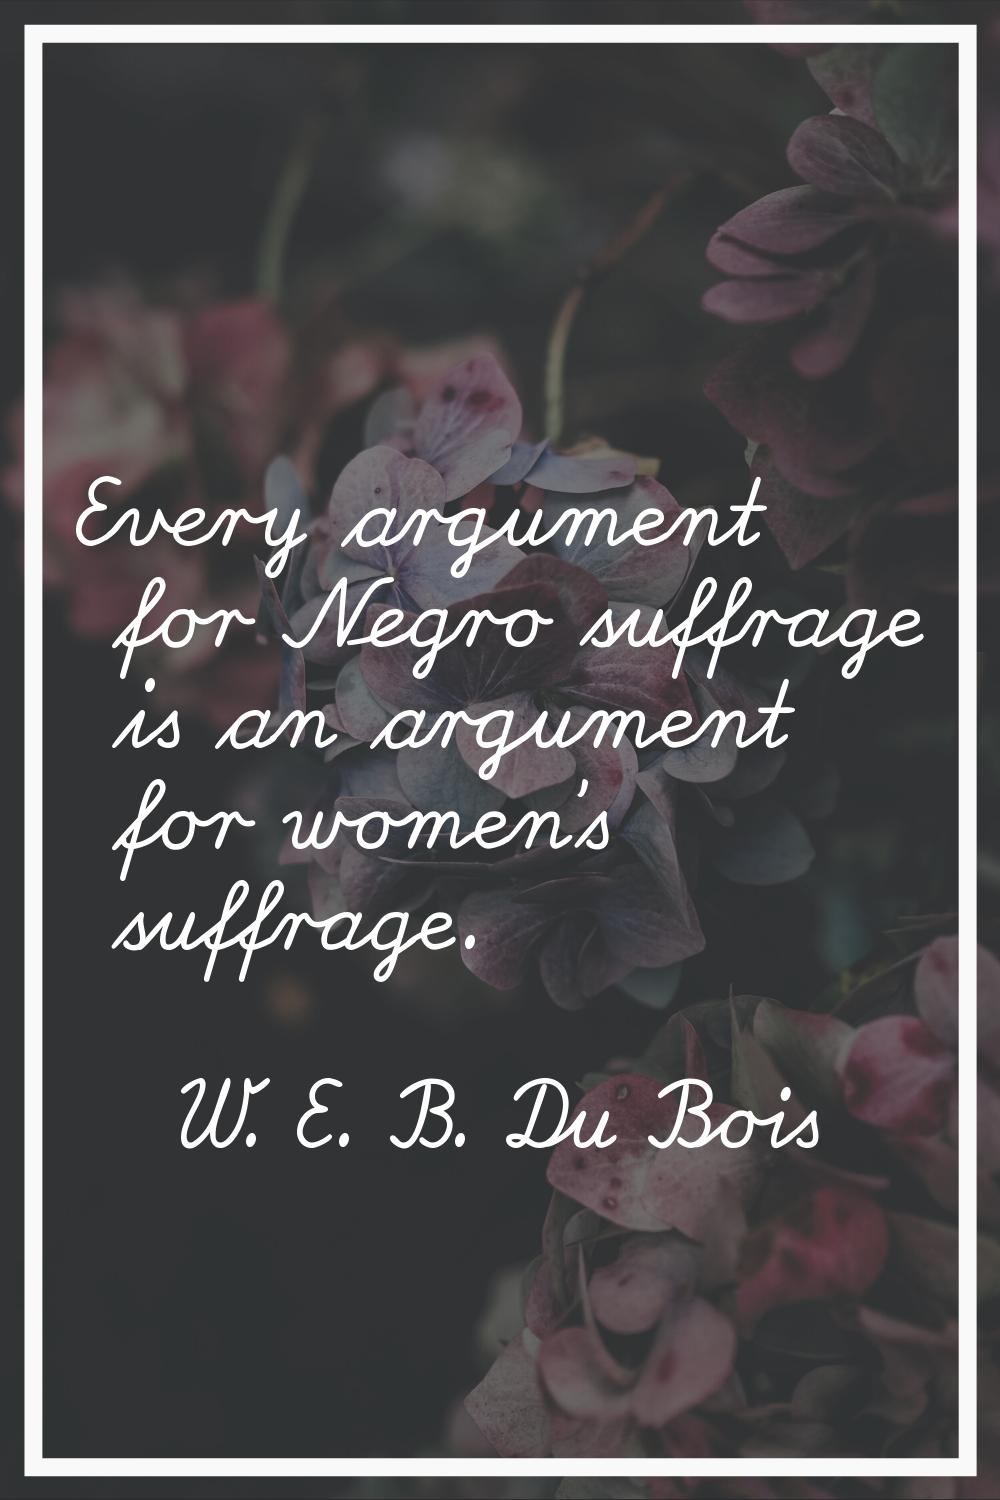 Every argument for Negro suffrage is an argument for women's suffrage.